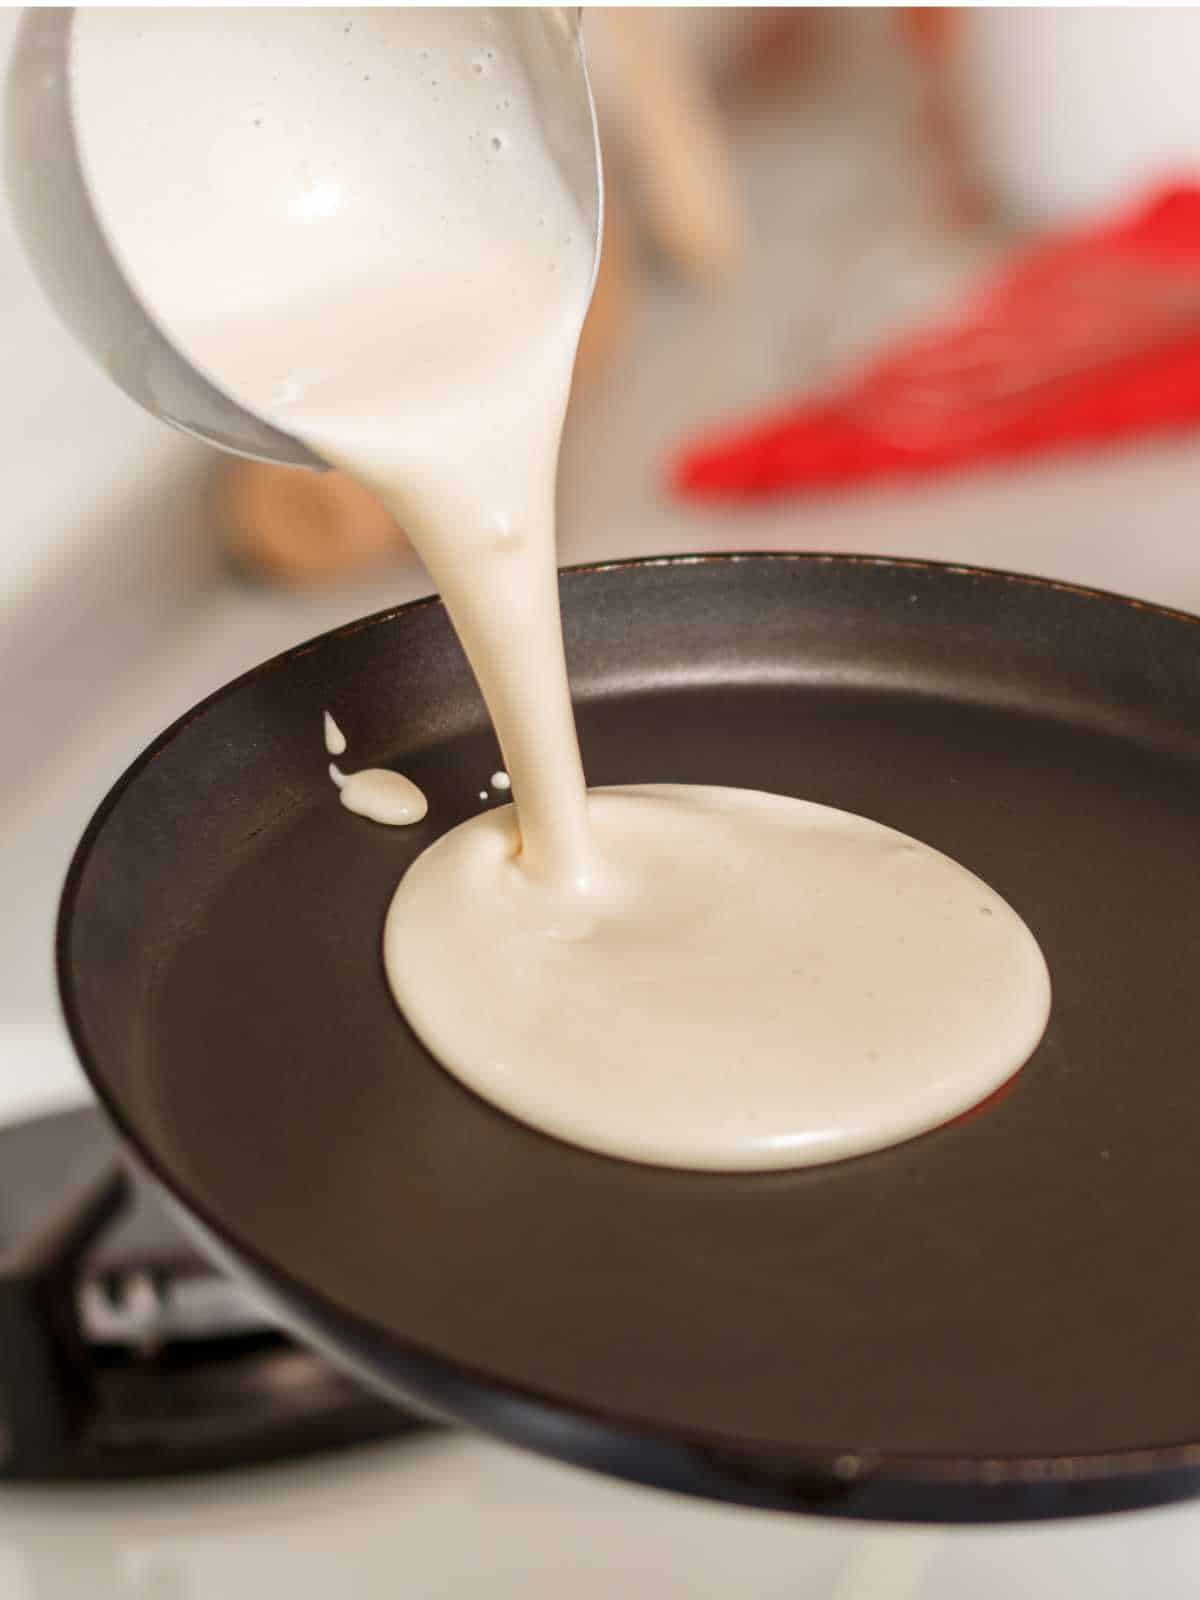 pouring some pancake batter onto a hot griddle.